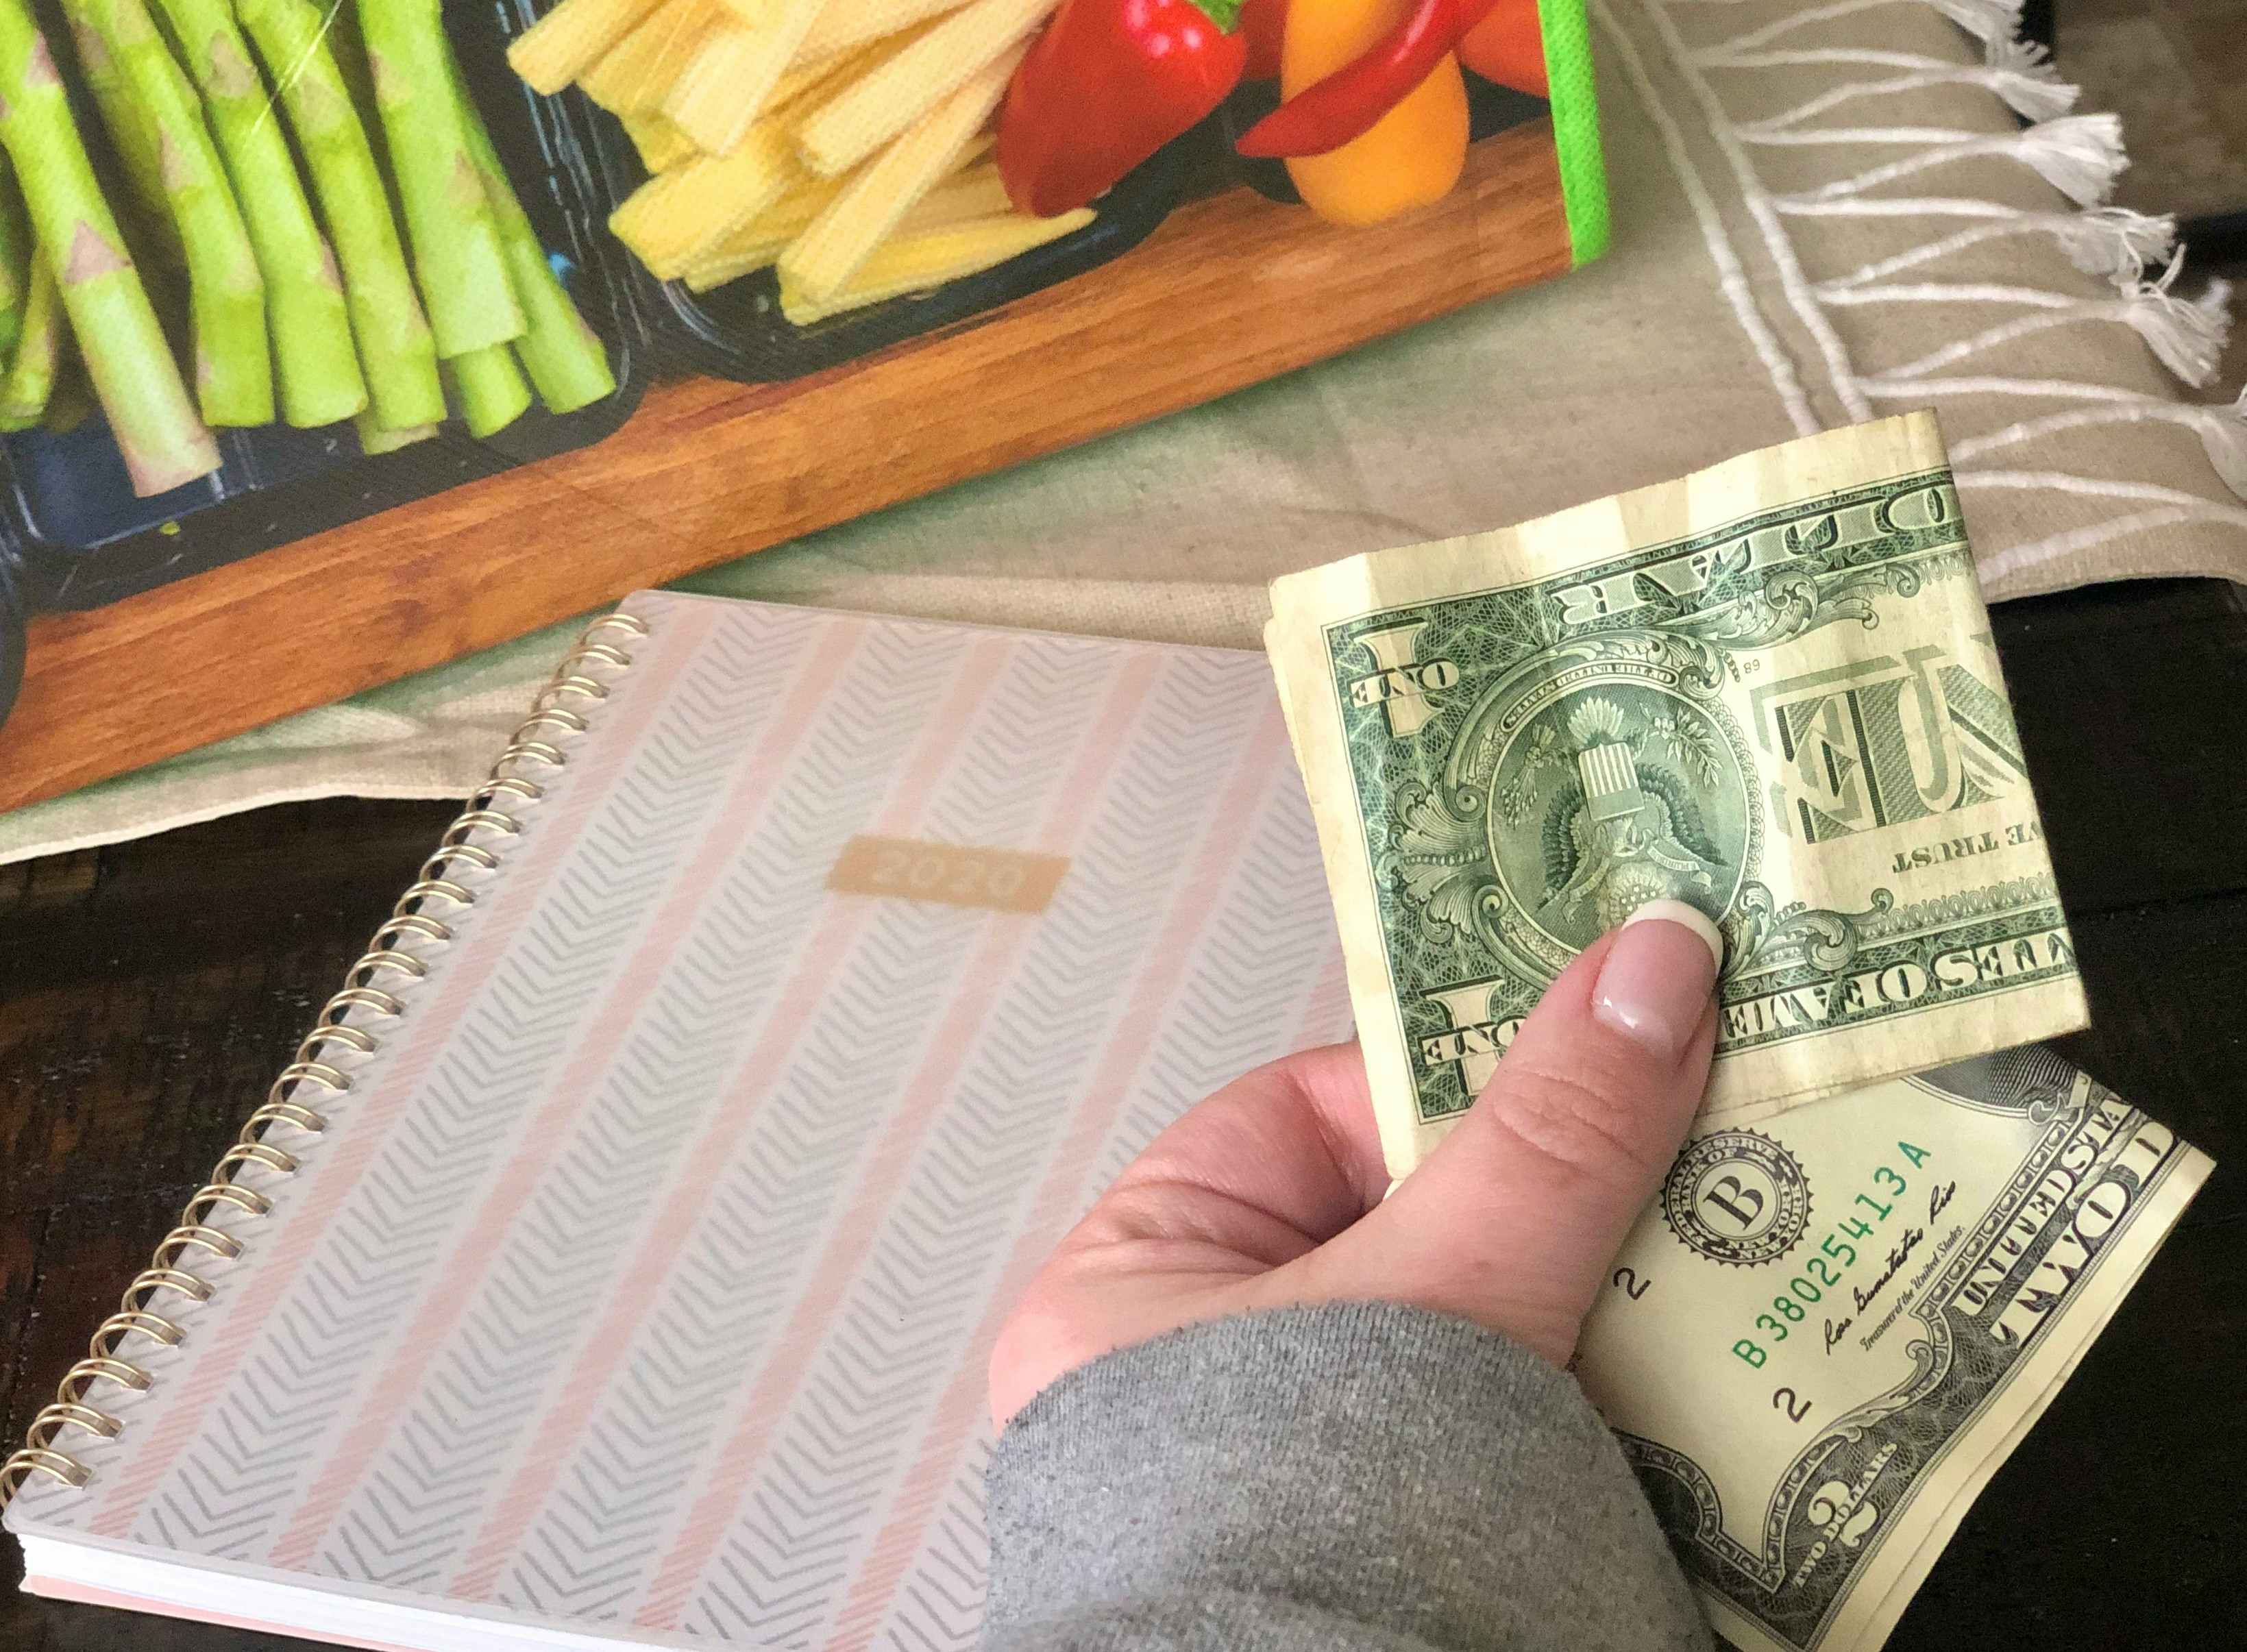 A hand holds cash while a planner and grocery bag are in the background.